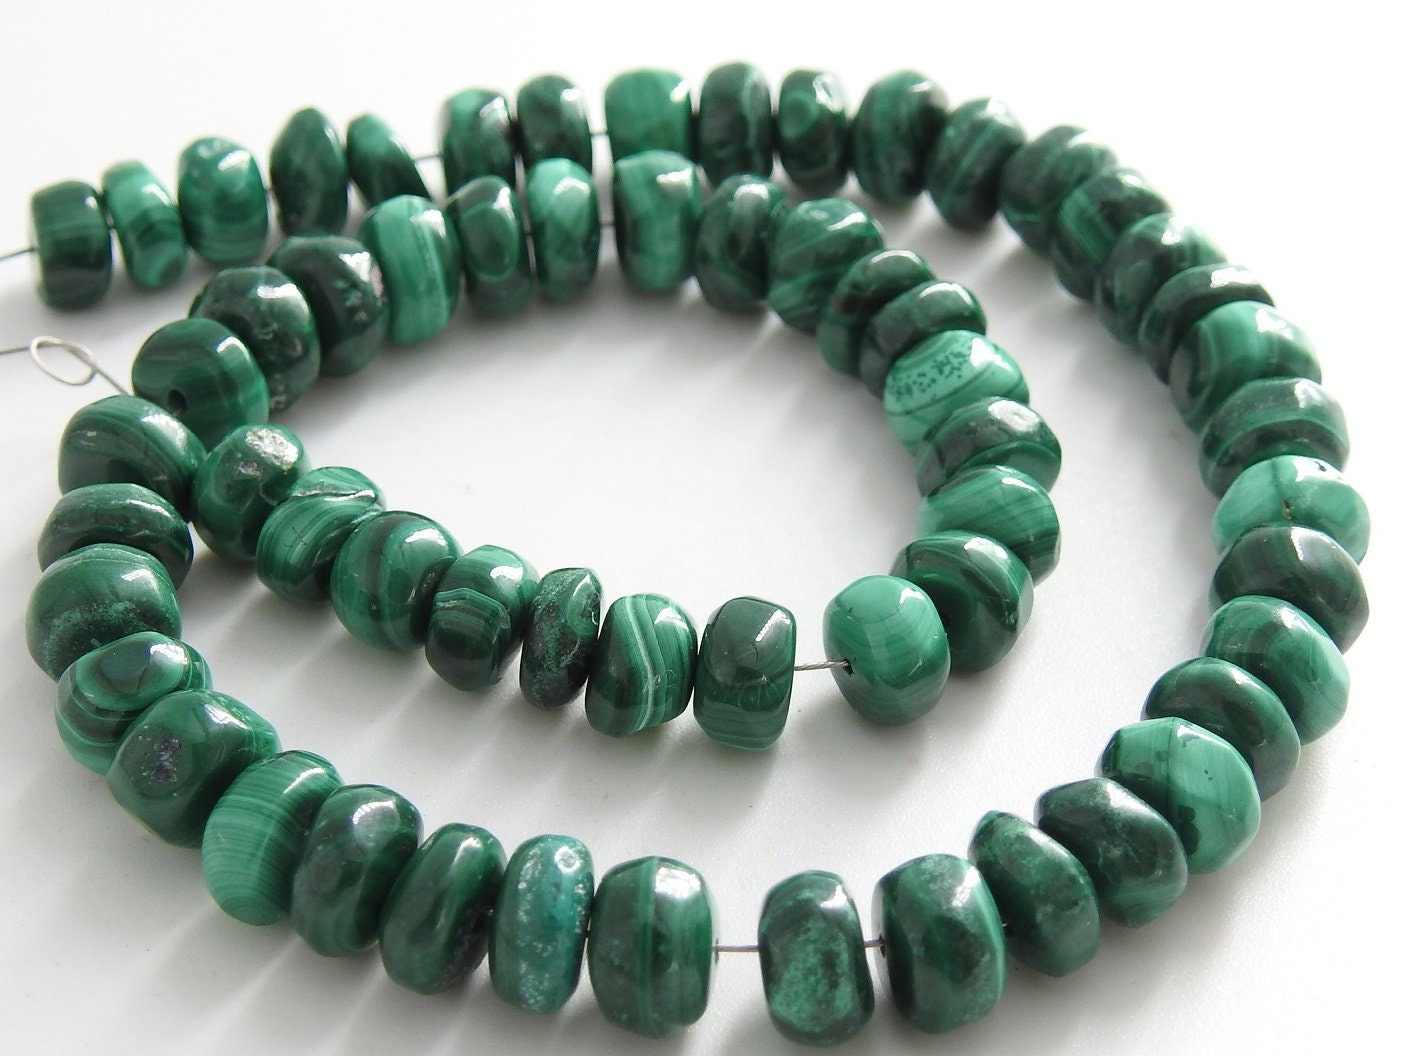 Malachite Roundel Bead,Smooth,Loose Stone,Handmade,For Making Jewelry,Necklace,Wholesaler,Supplies,10Inch Strand,100%Natural PME(B13) | Save 33% - Rajasthan Living 15